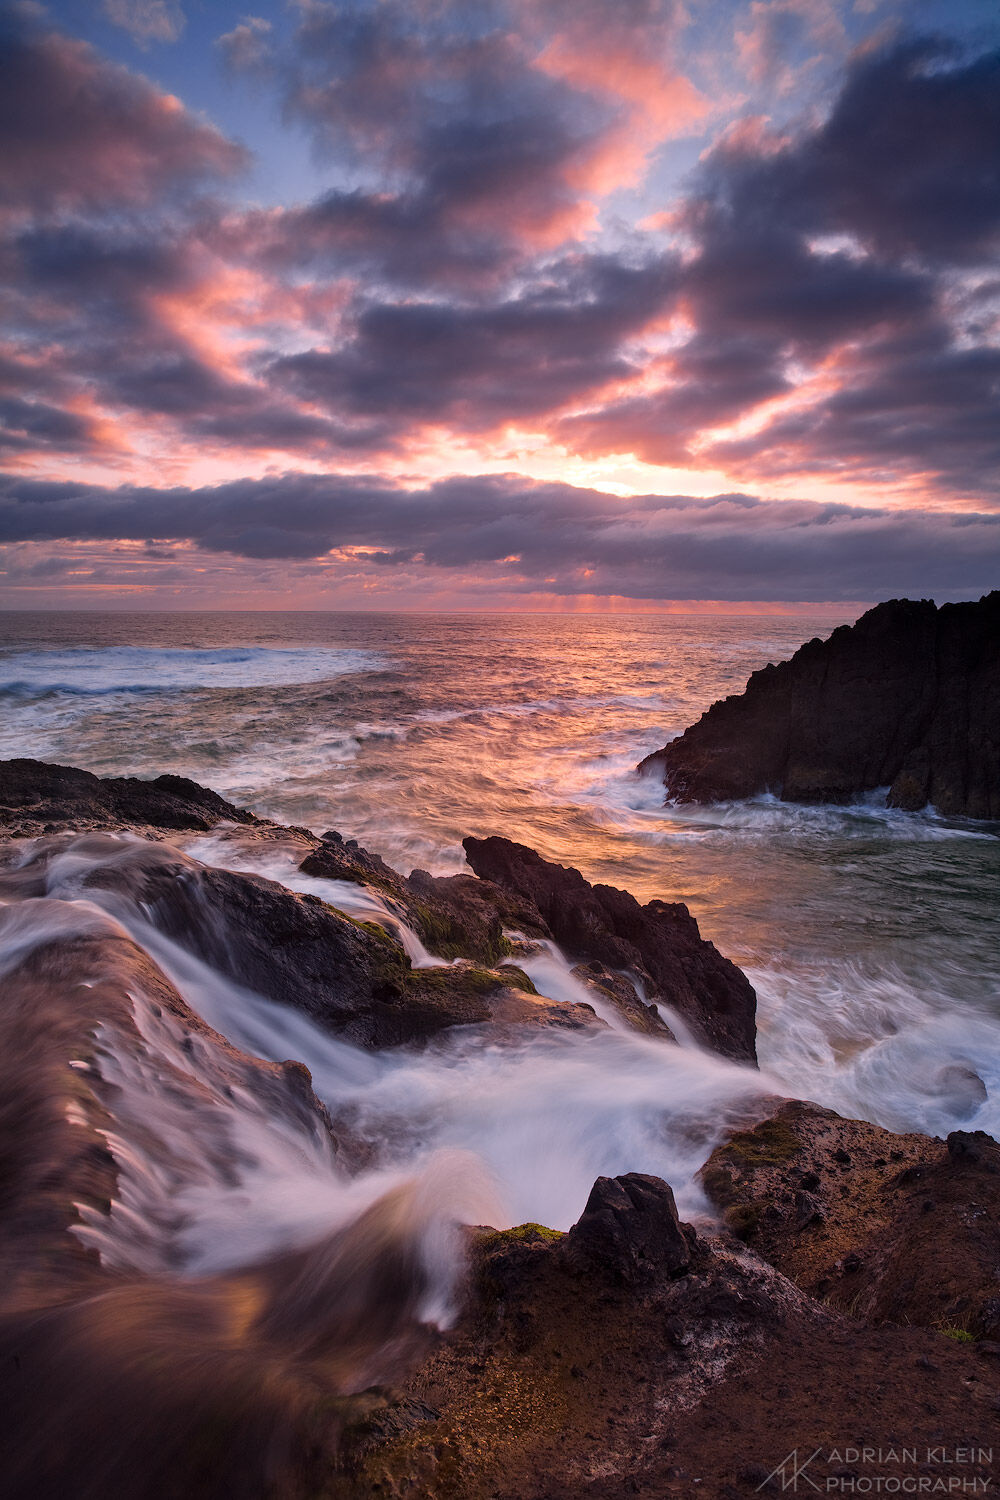 A sublime and fleeting sunset along the Northern Coast, Oregon.